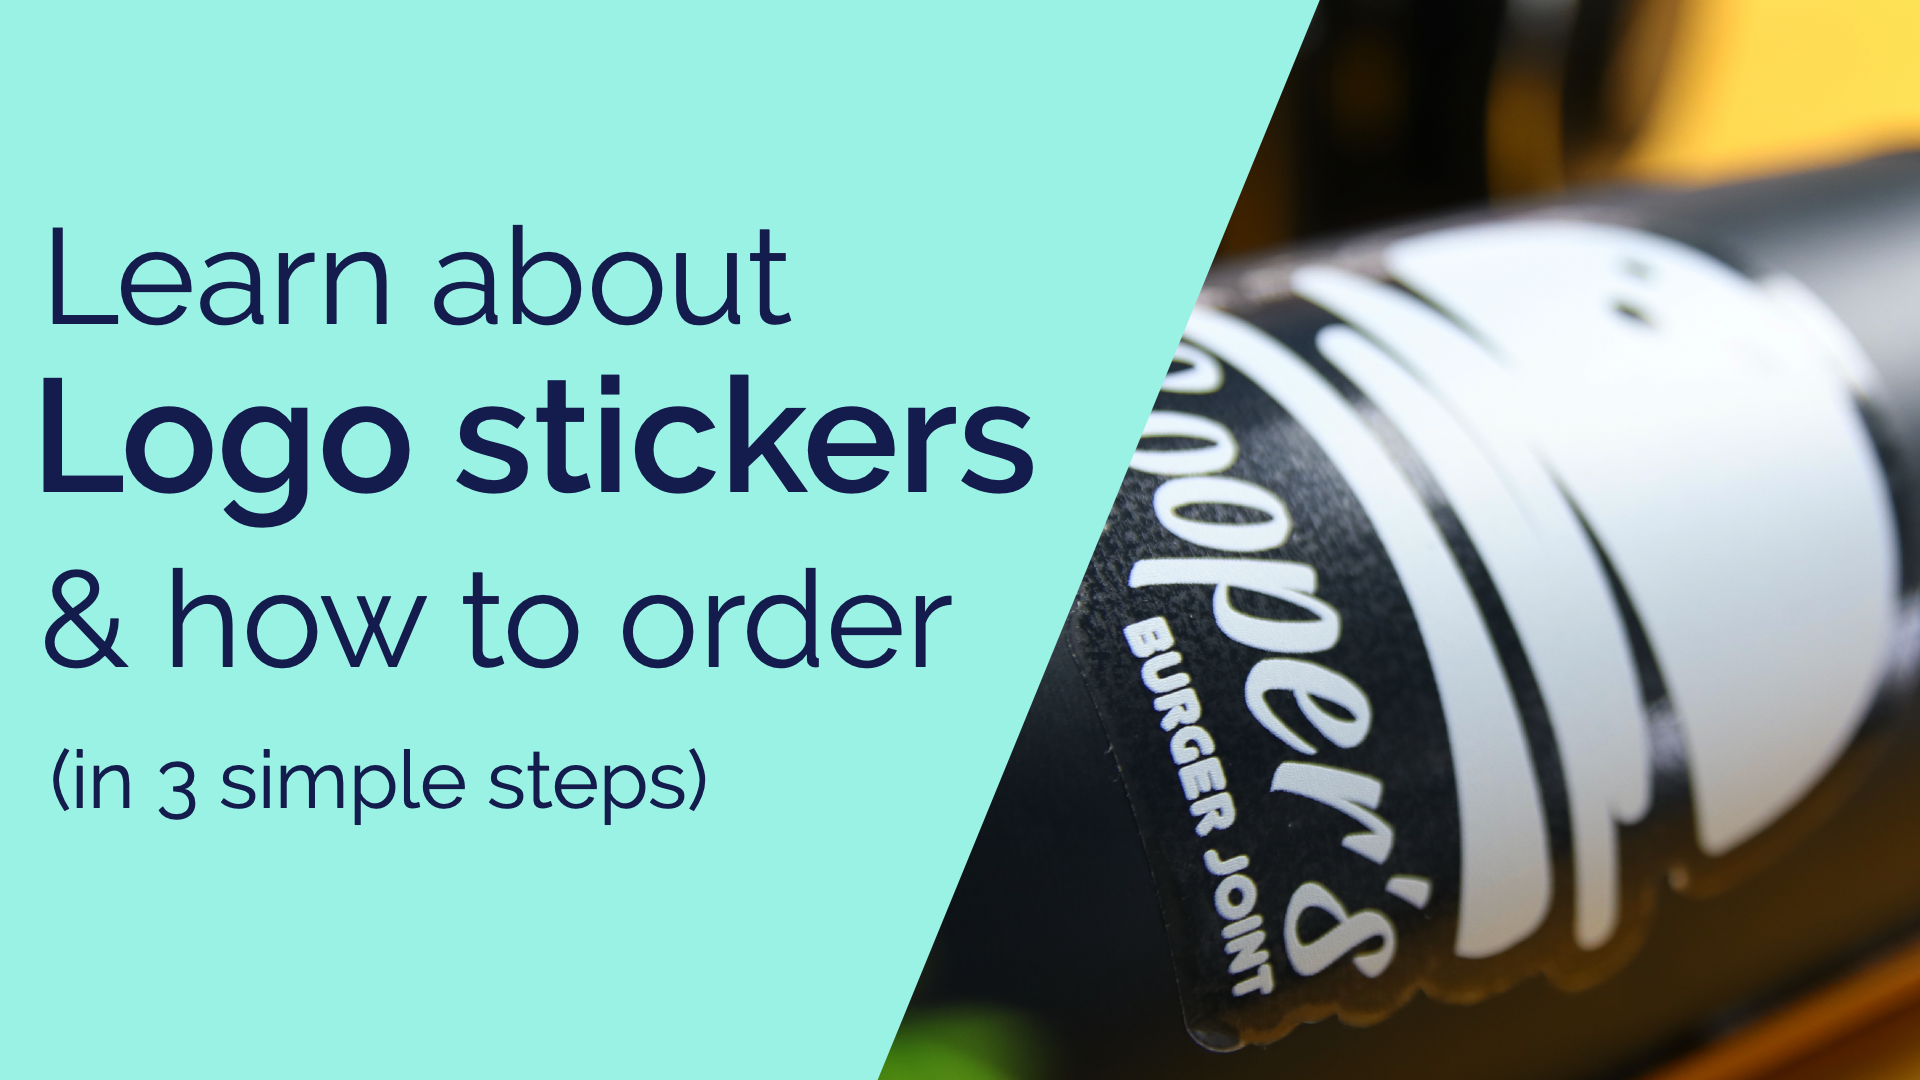 Video laden: A video explaining what logo stickers are and how to order them